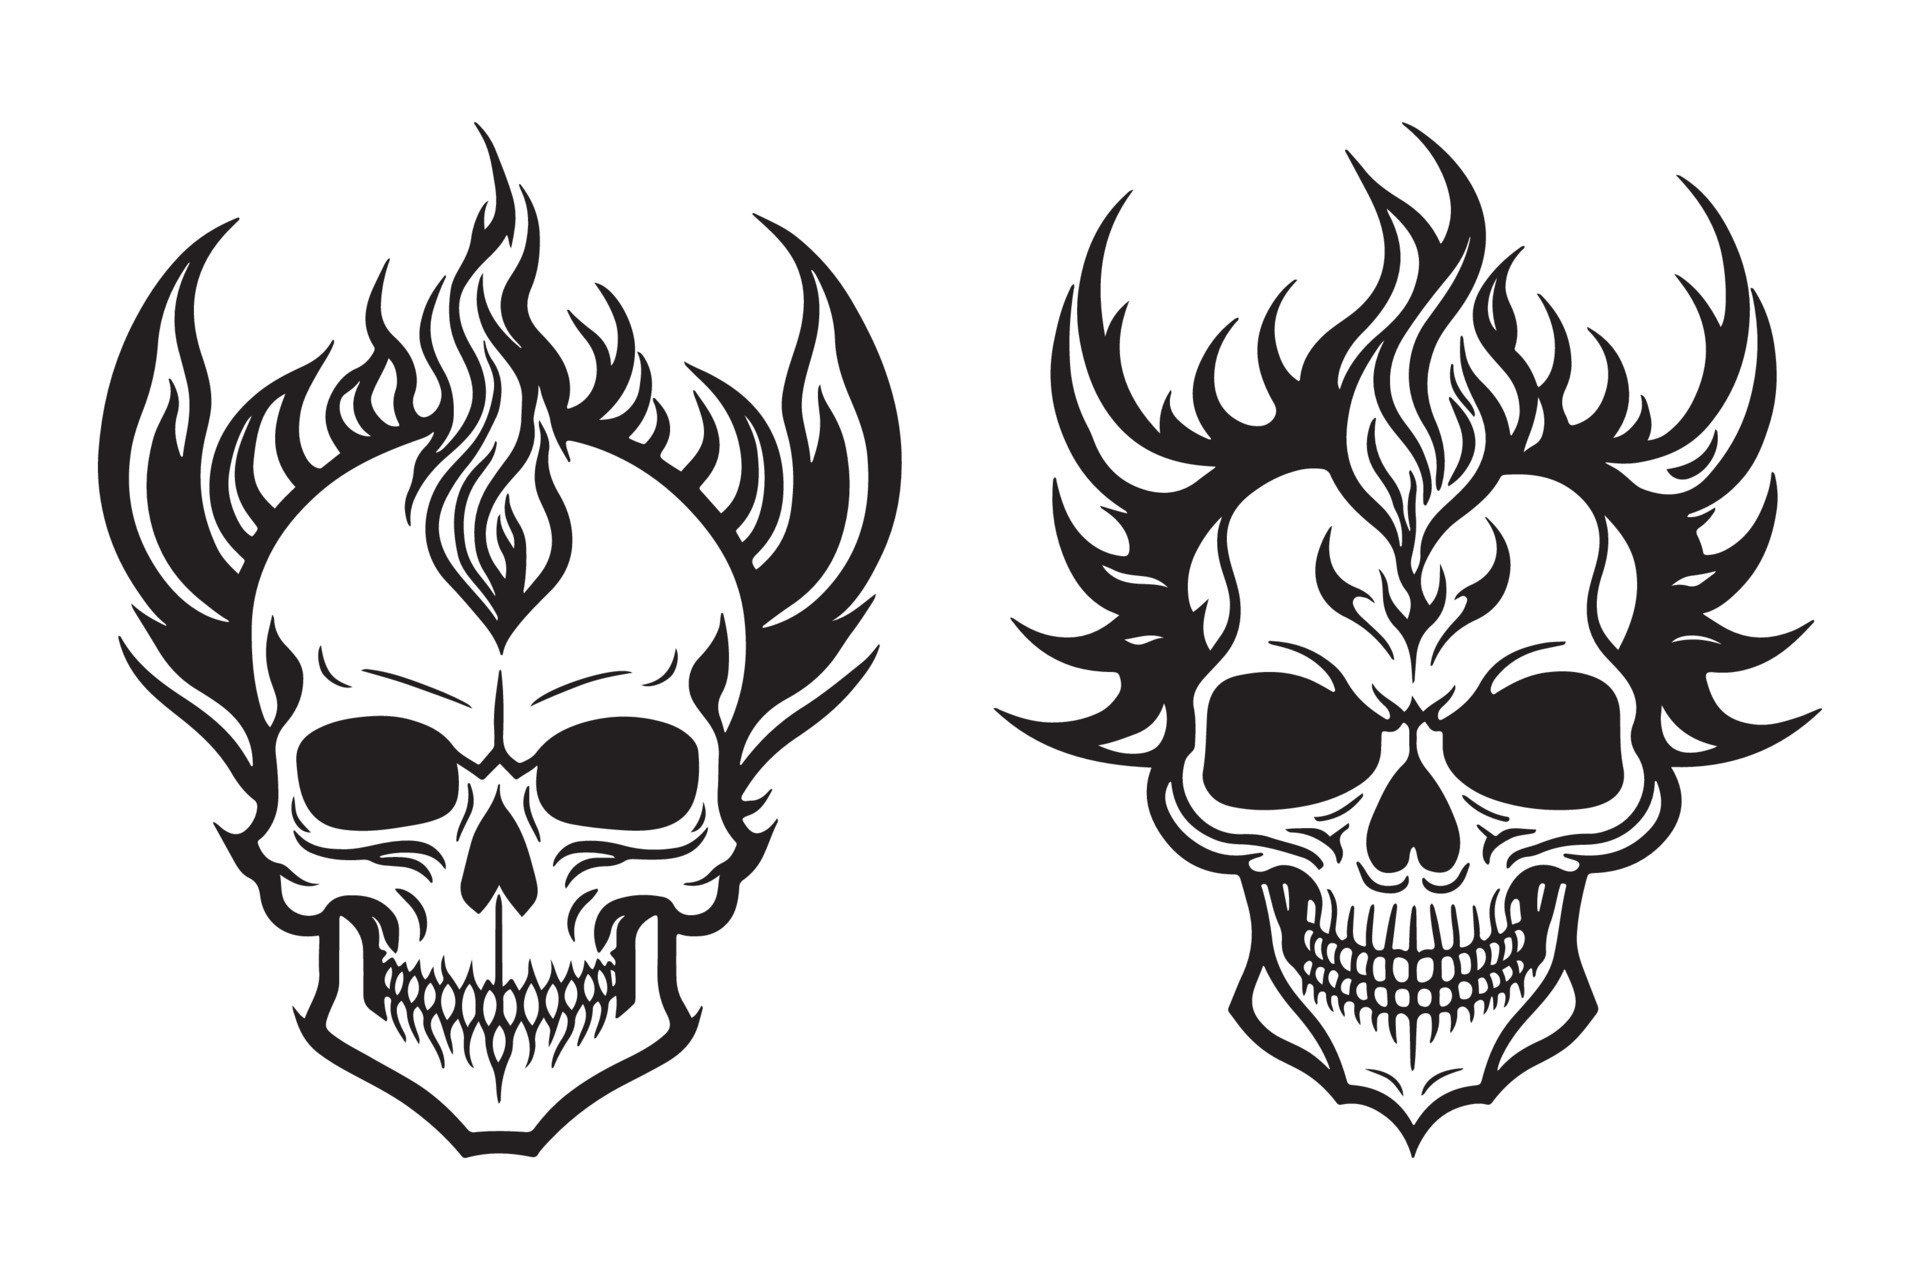 Fire Aag Tattoo For Boy and Girl Temporary Body Tattoo Waterproof Sticker